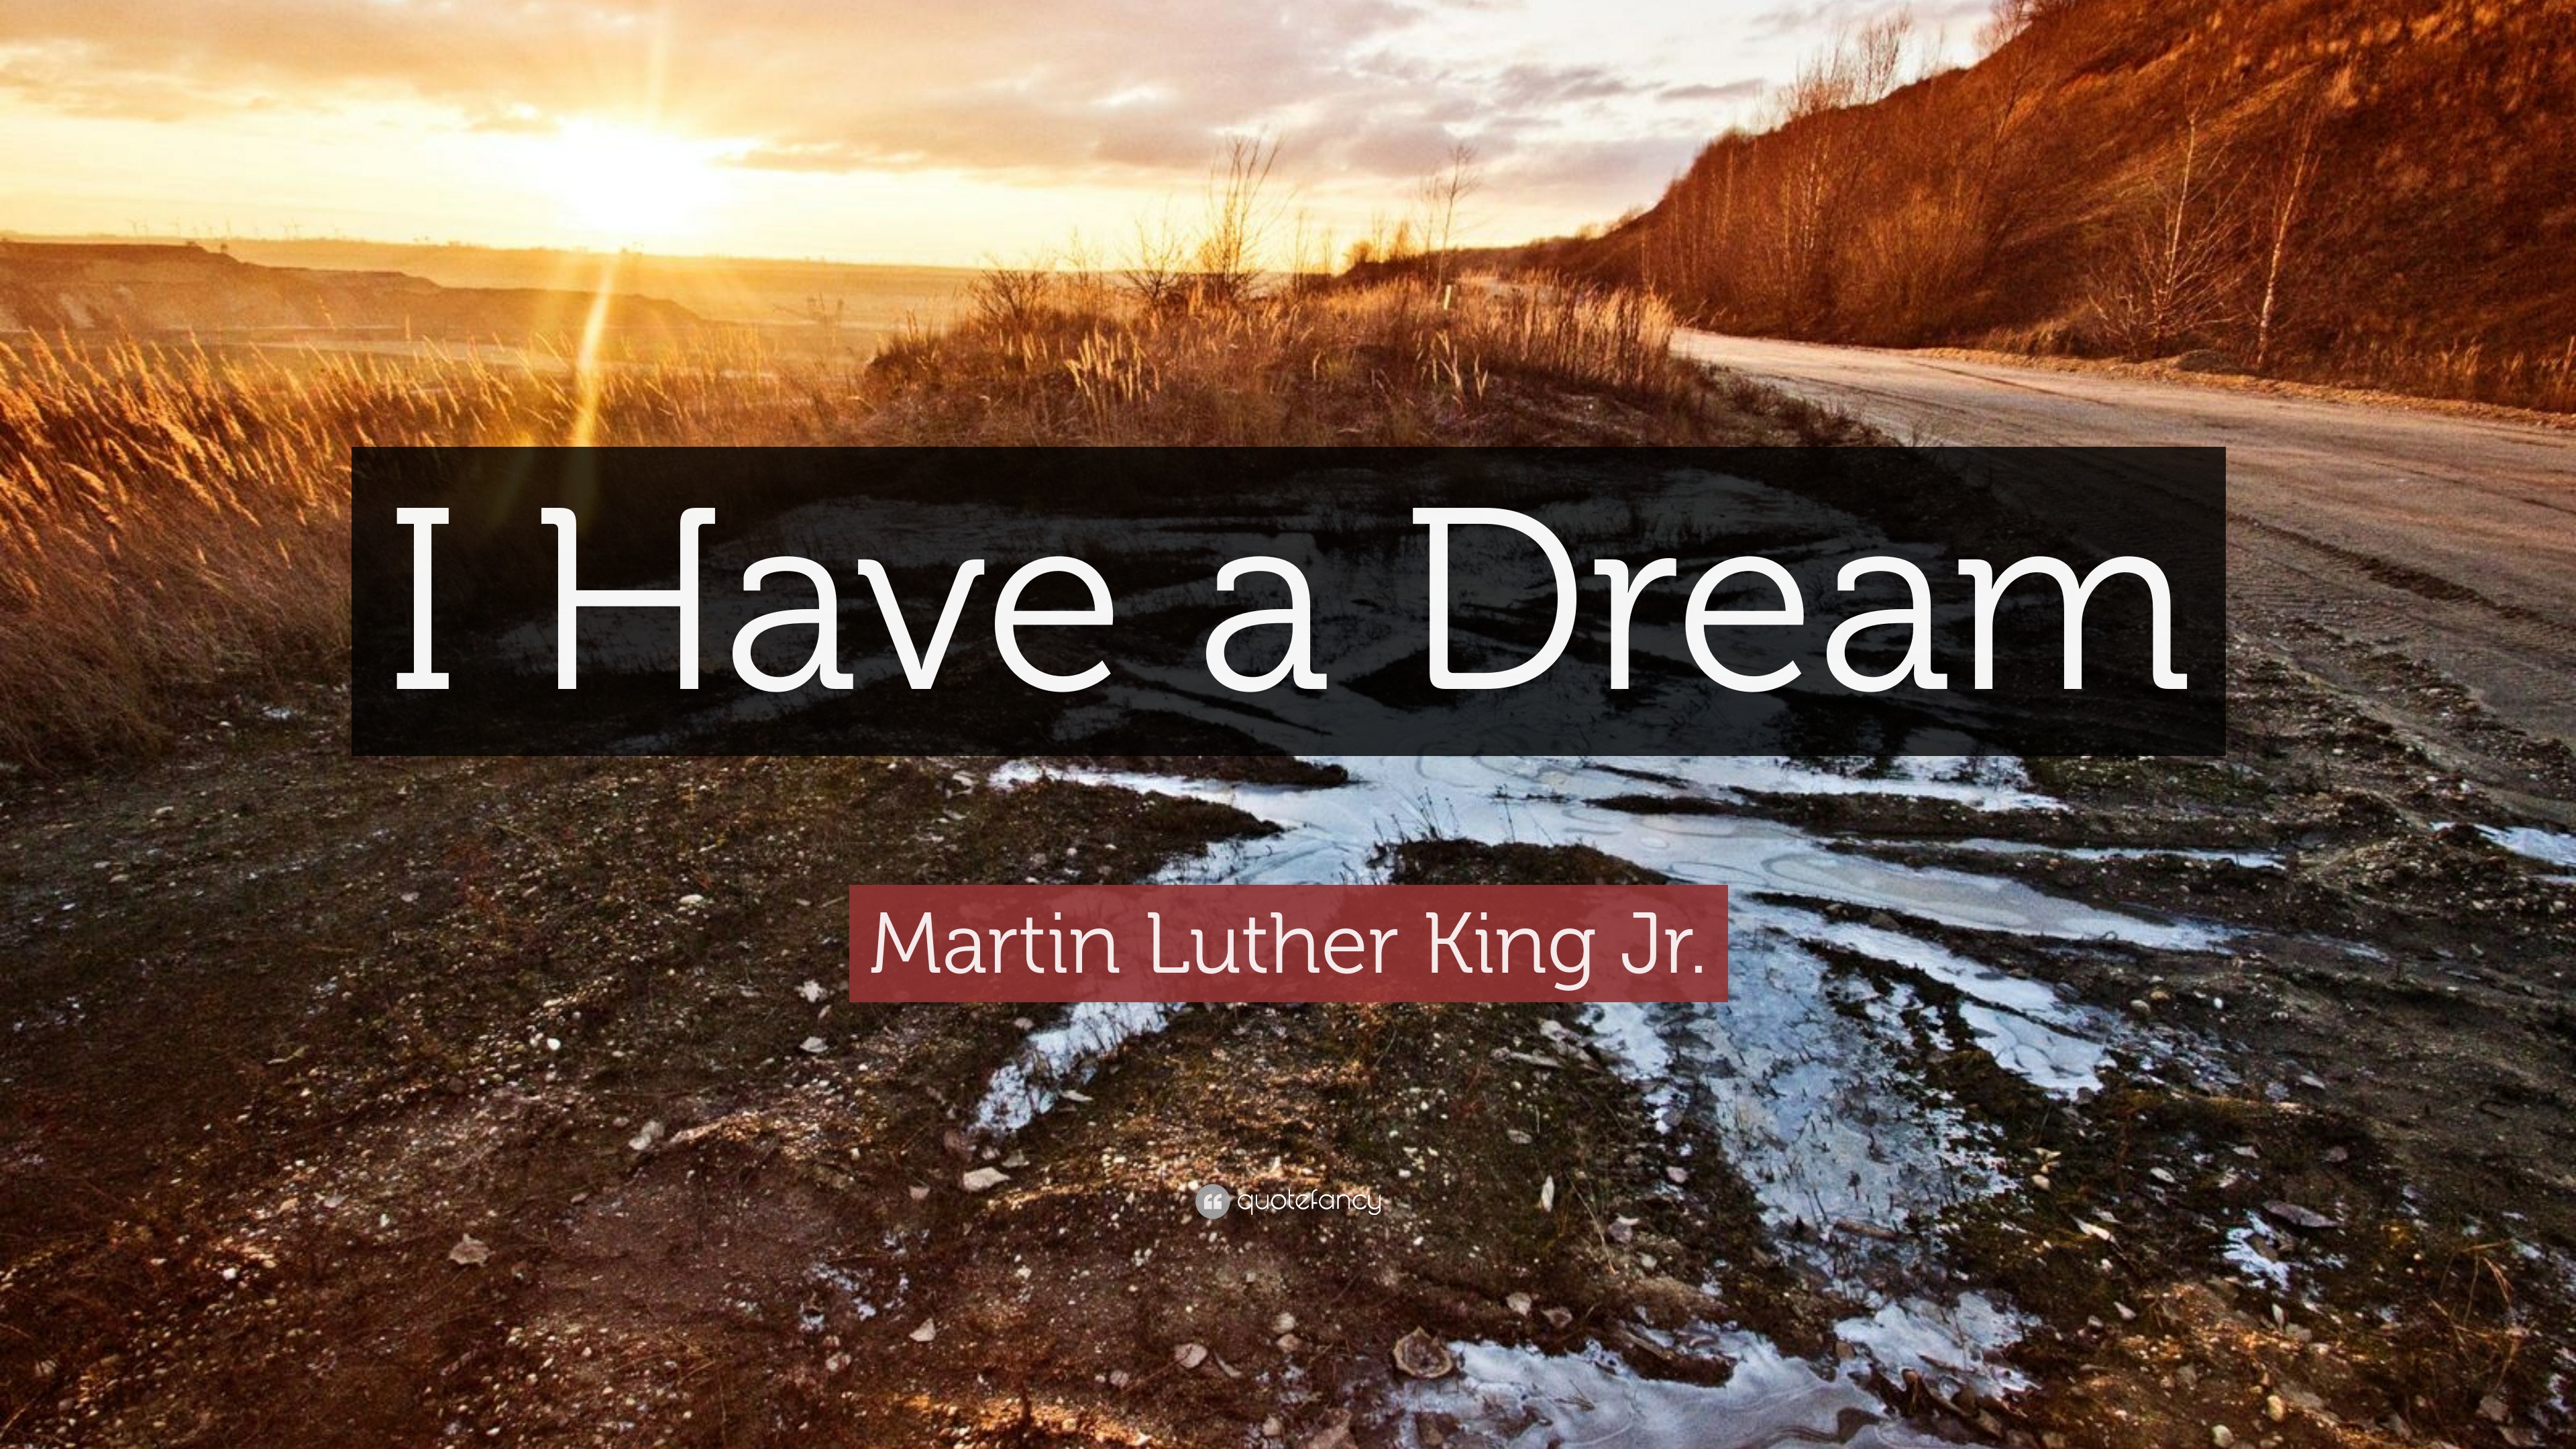 Martin Luther King Jr. Quote “I Have a Dream”